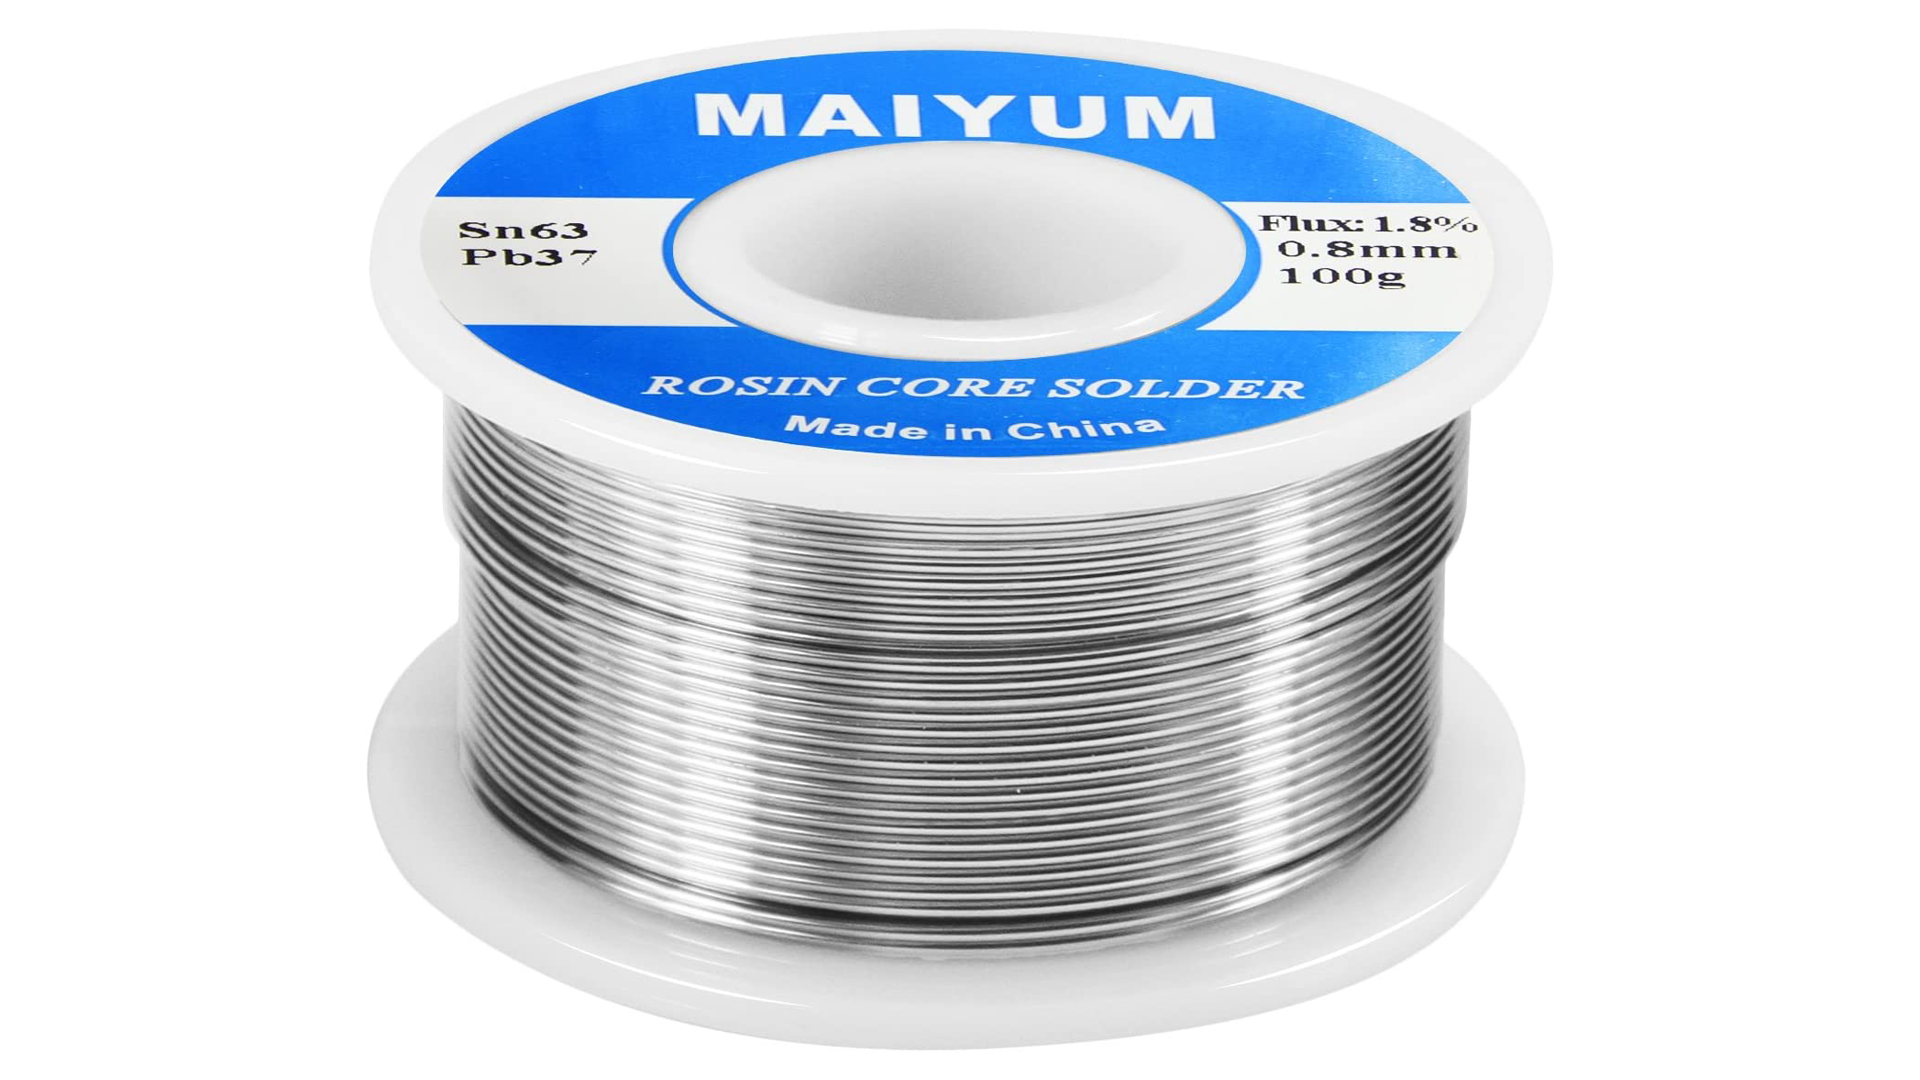 MAIYUM 63-37 Tin Lead Rosin Core Solder Wire for Electrical Soldering (0.8mm 100g)